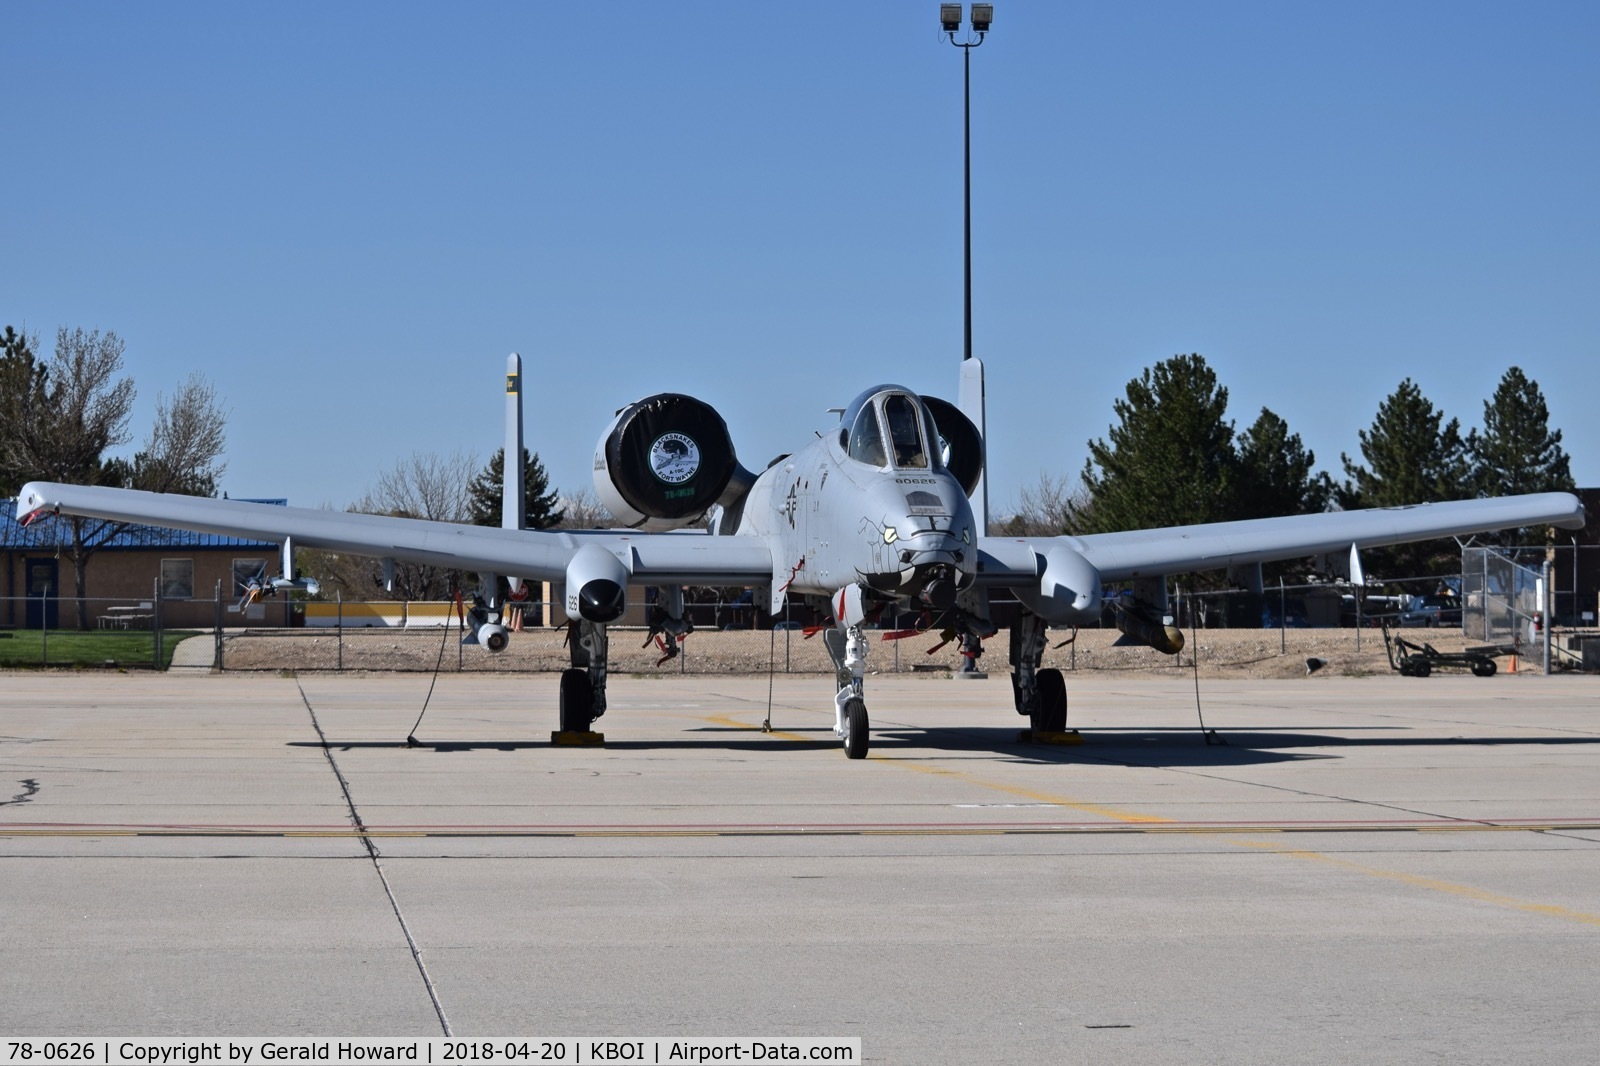 78-0626, 1978 Fairchild Republic A-10C Thunderbolt II C/N A10-0246, Parked on the Idaho ANG ramp. From the 122nd Fighter Wing 